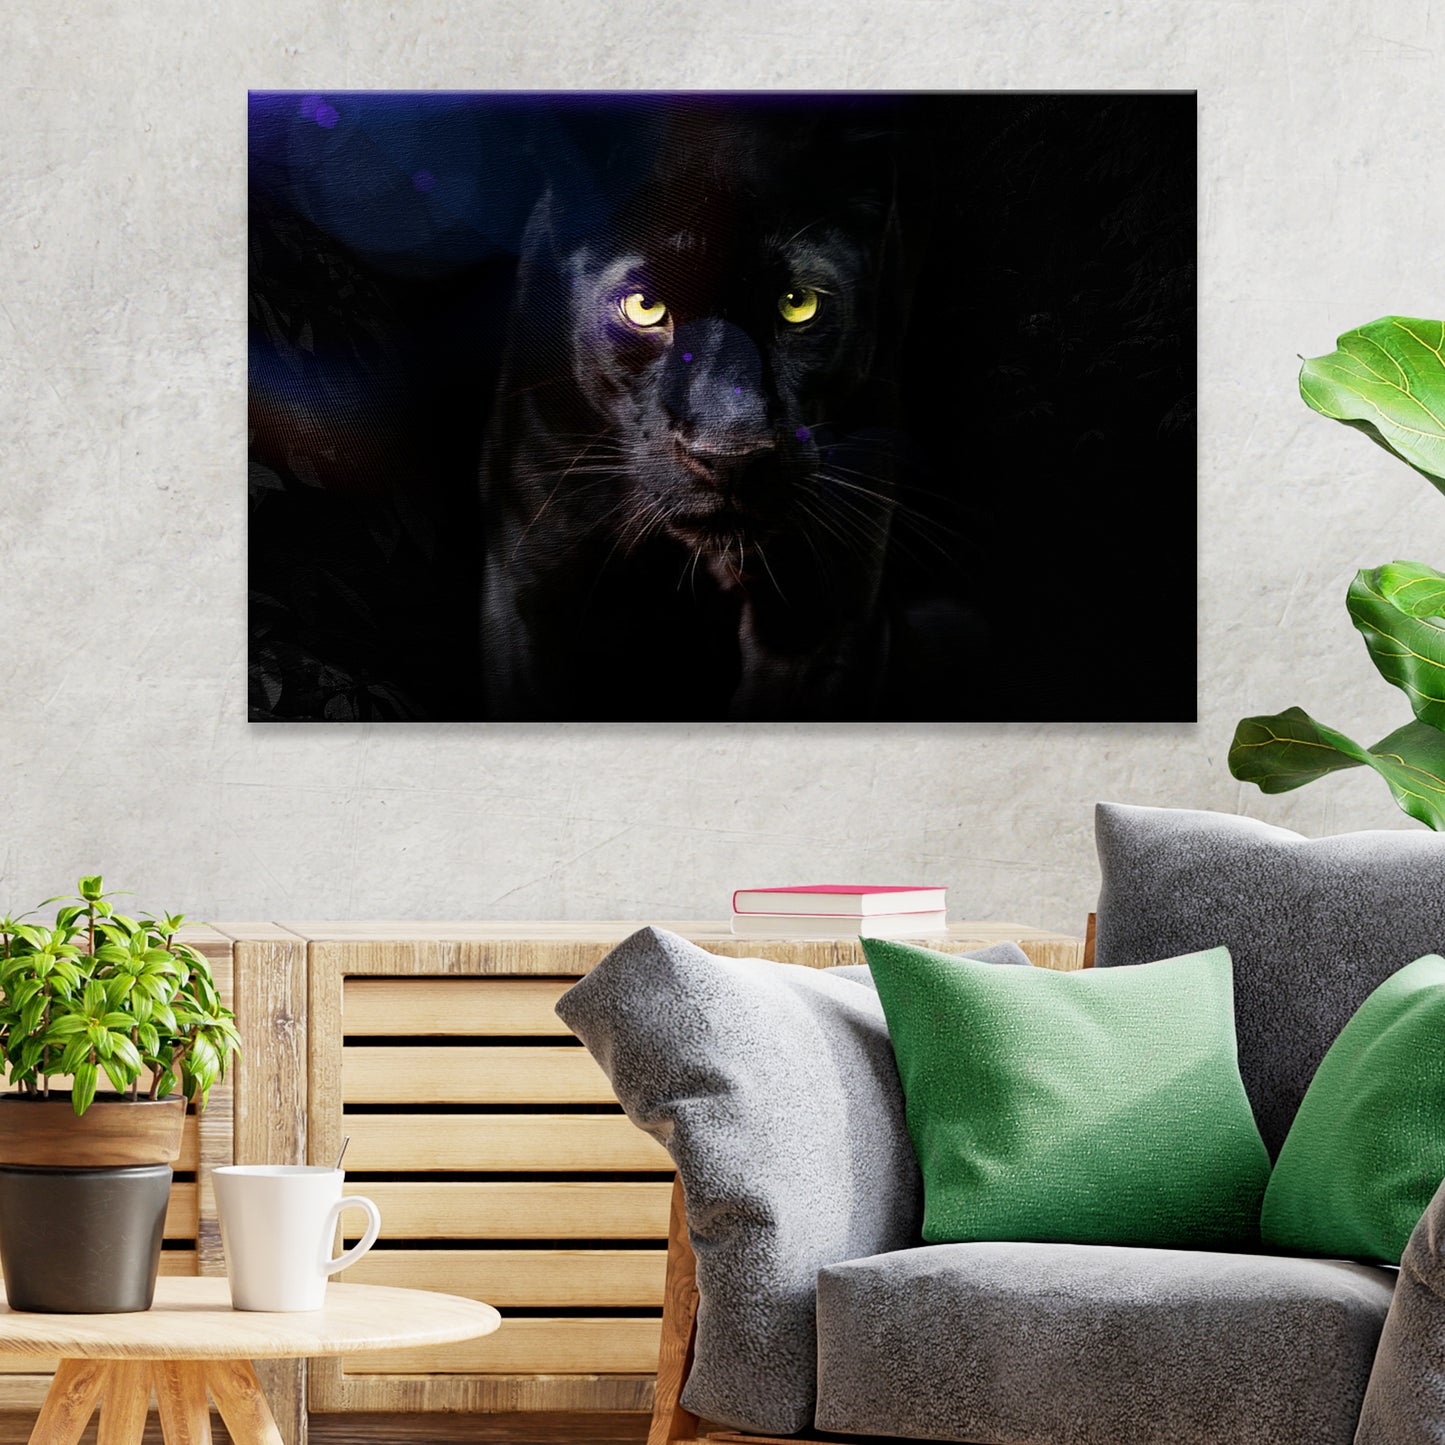 Rare Black Panther Canvas Wall Art - Image by Tailored Canvases